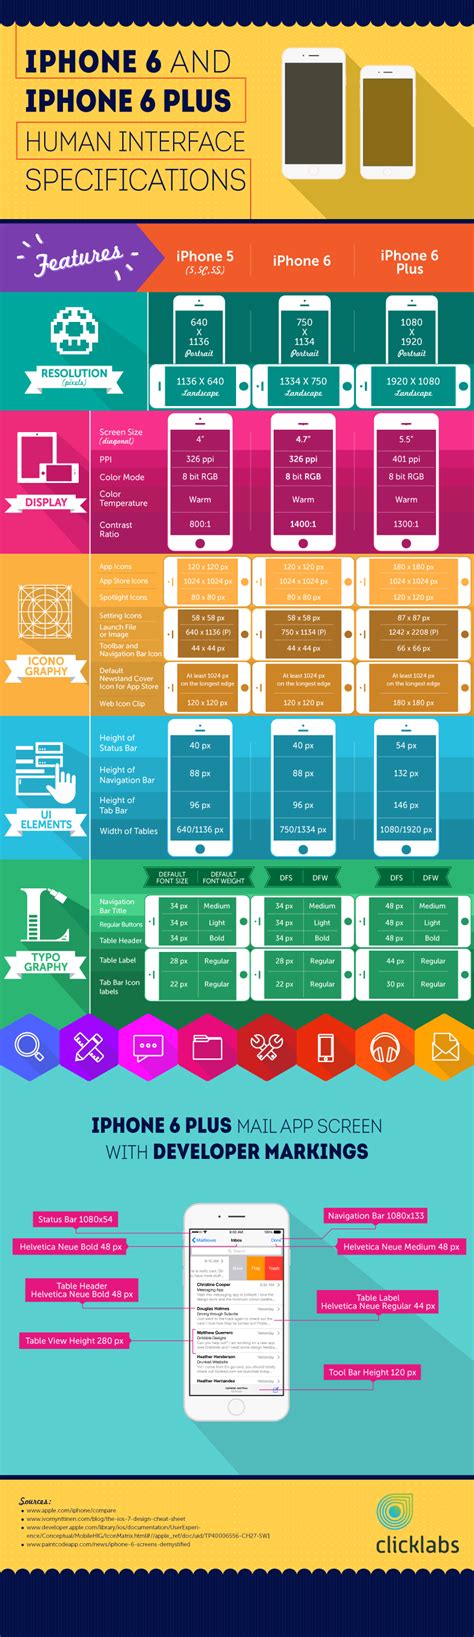 Iphone 6 Template Cheat Sheet Infographic Click Labs